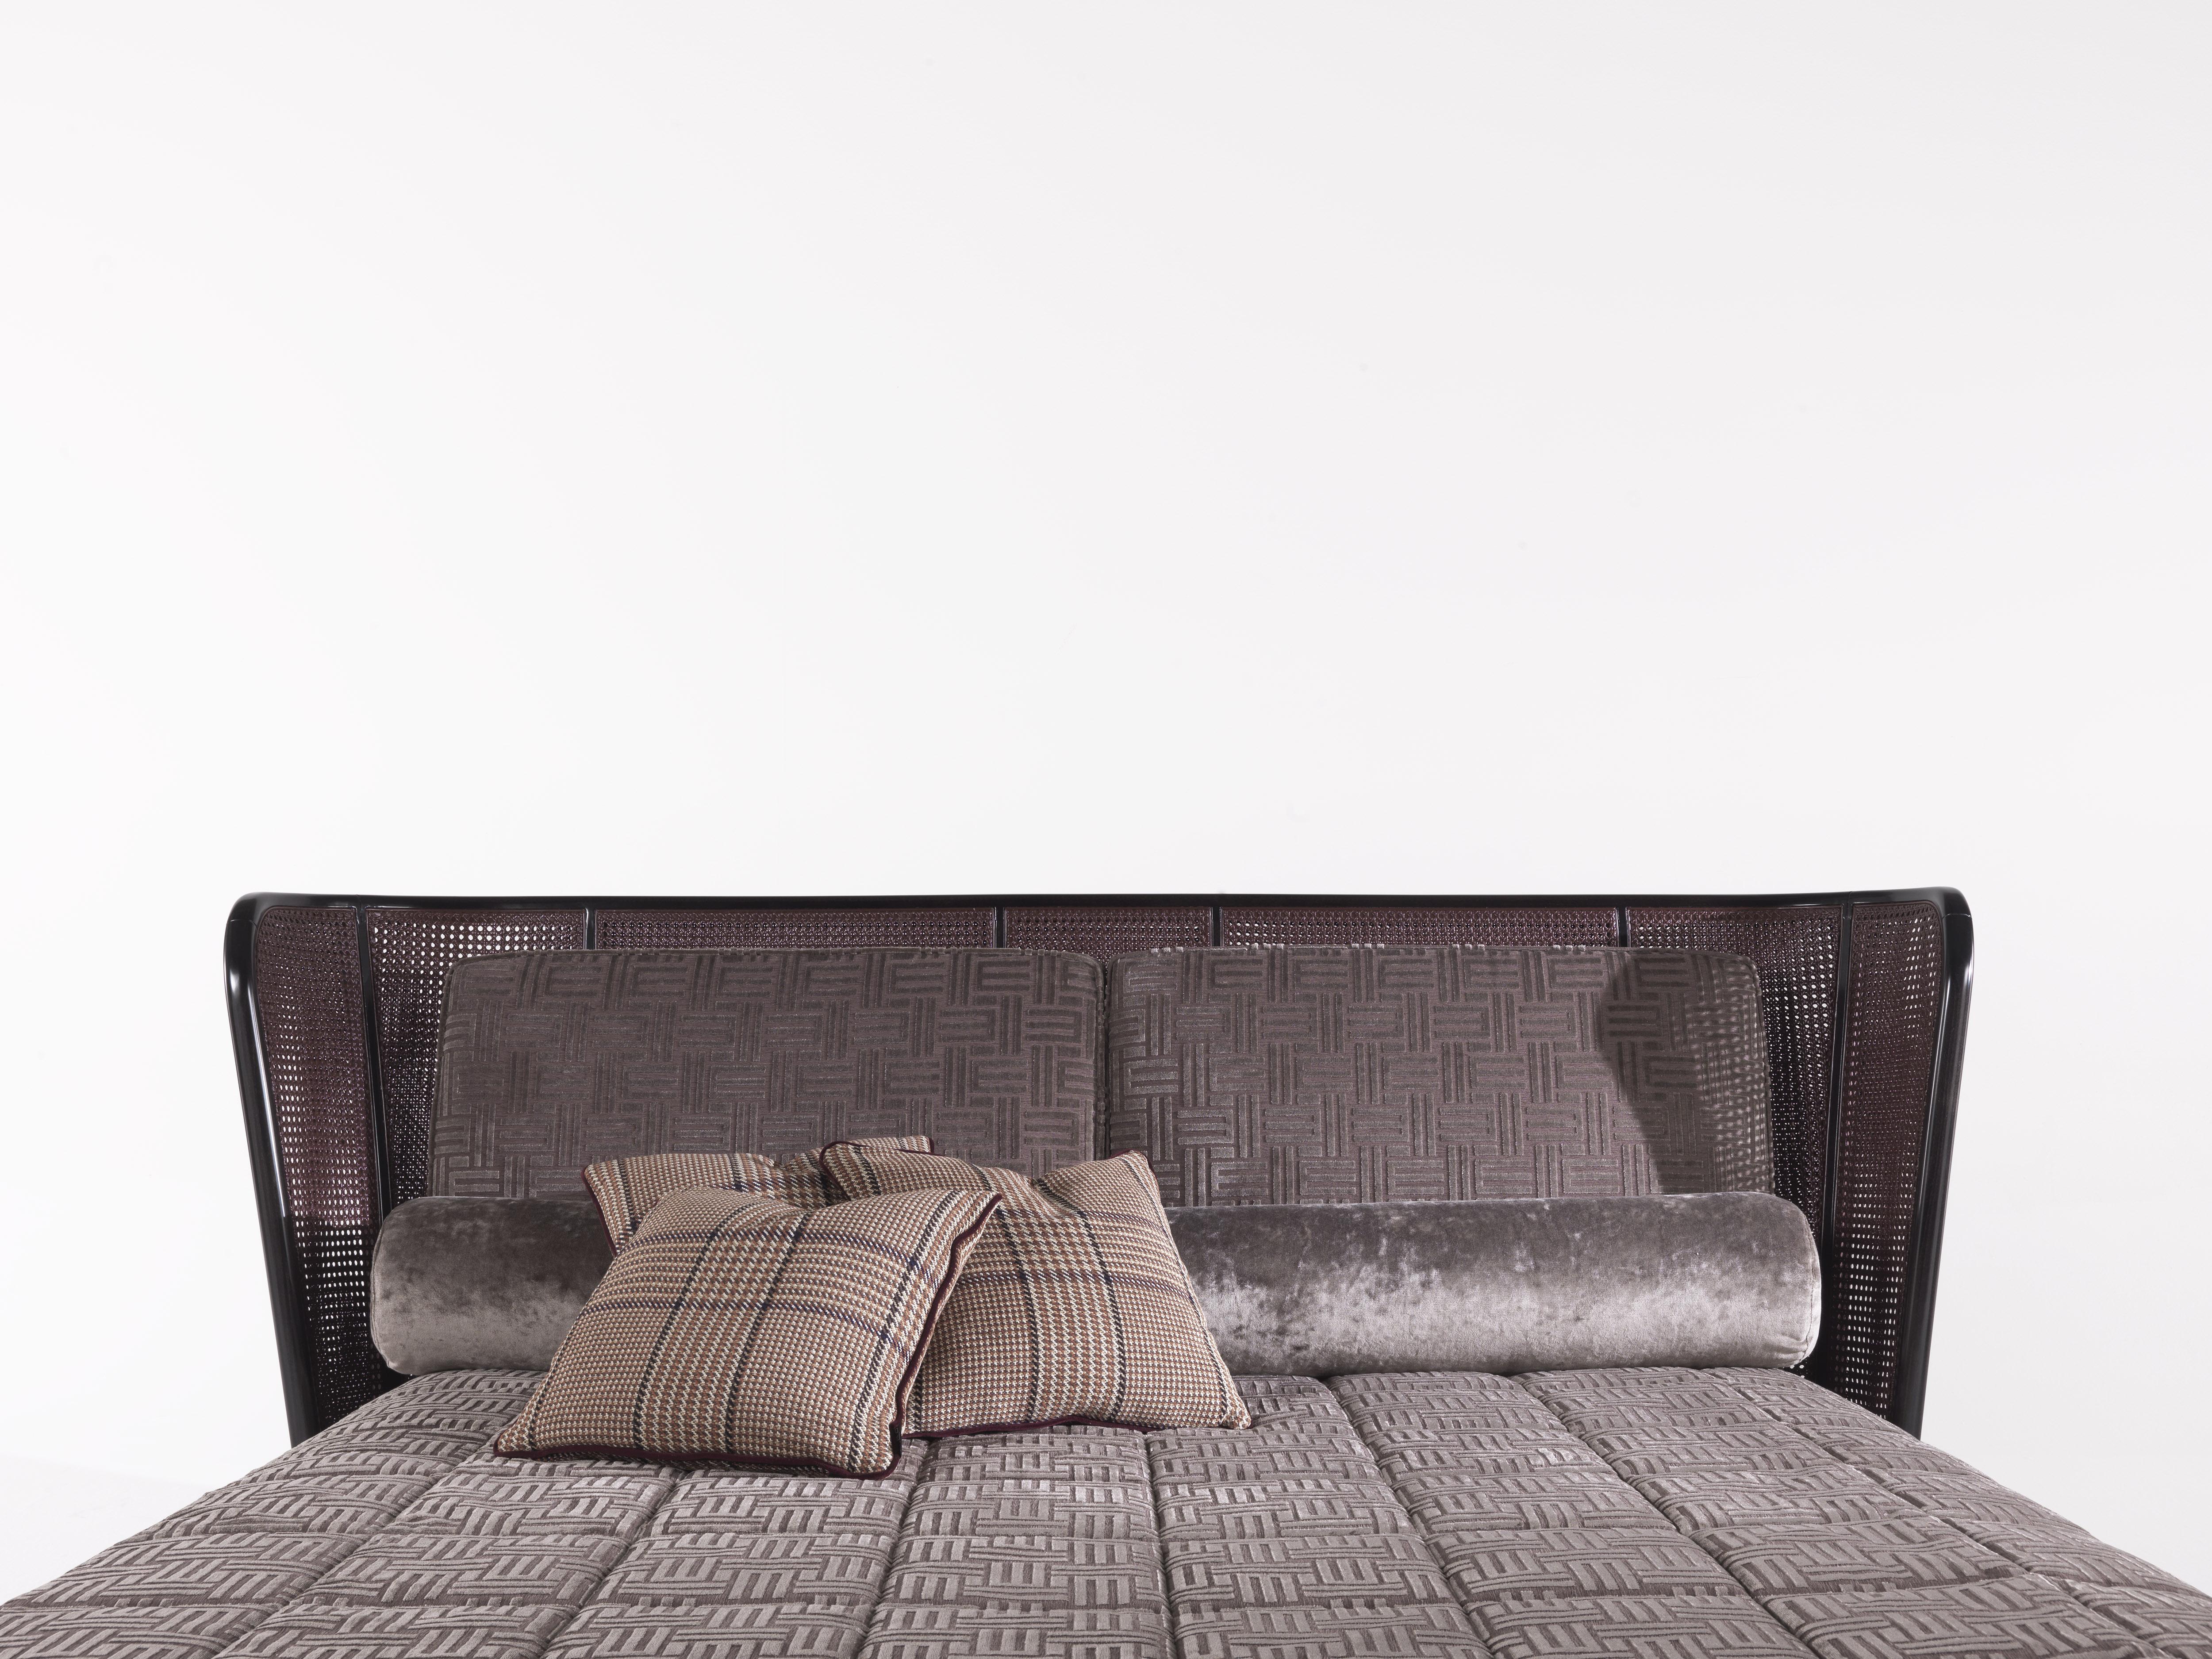 Italian 21st Century Caral Bed in Velvet (for mattress 200*200)  by Etro Home Interiors